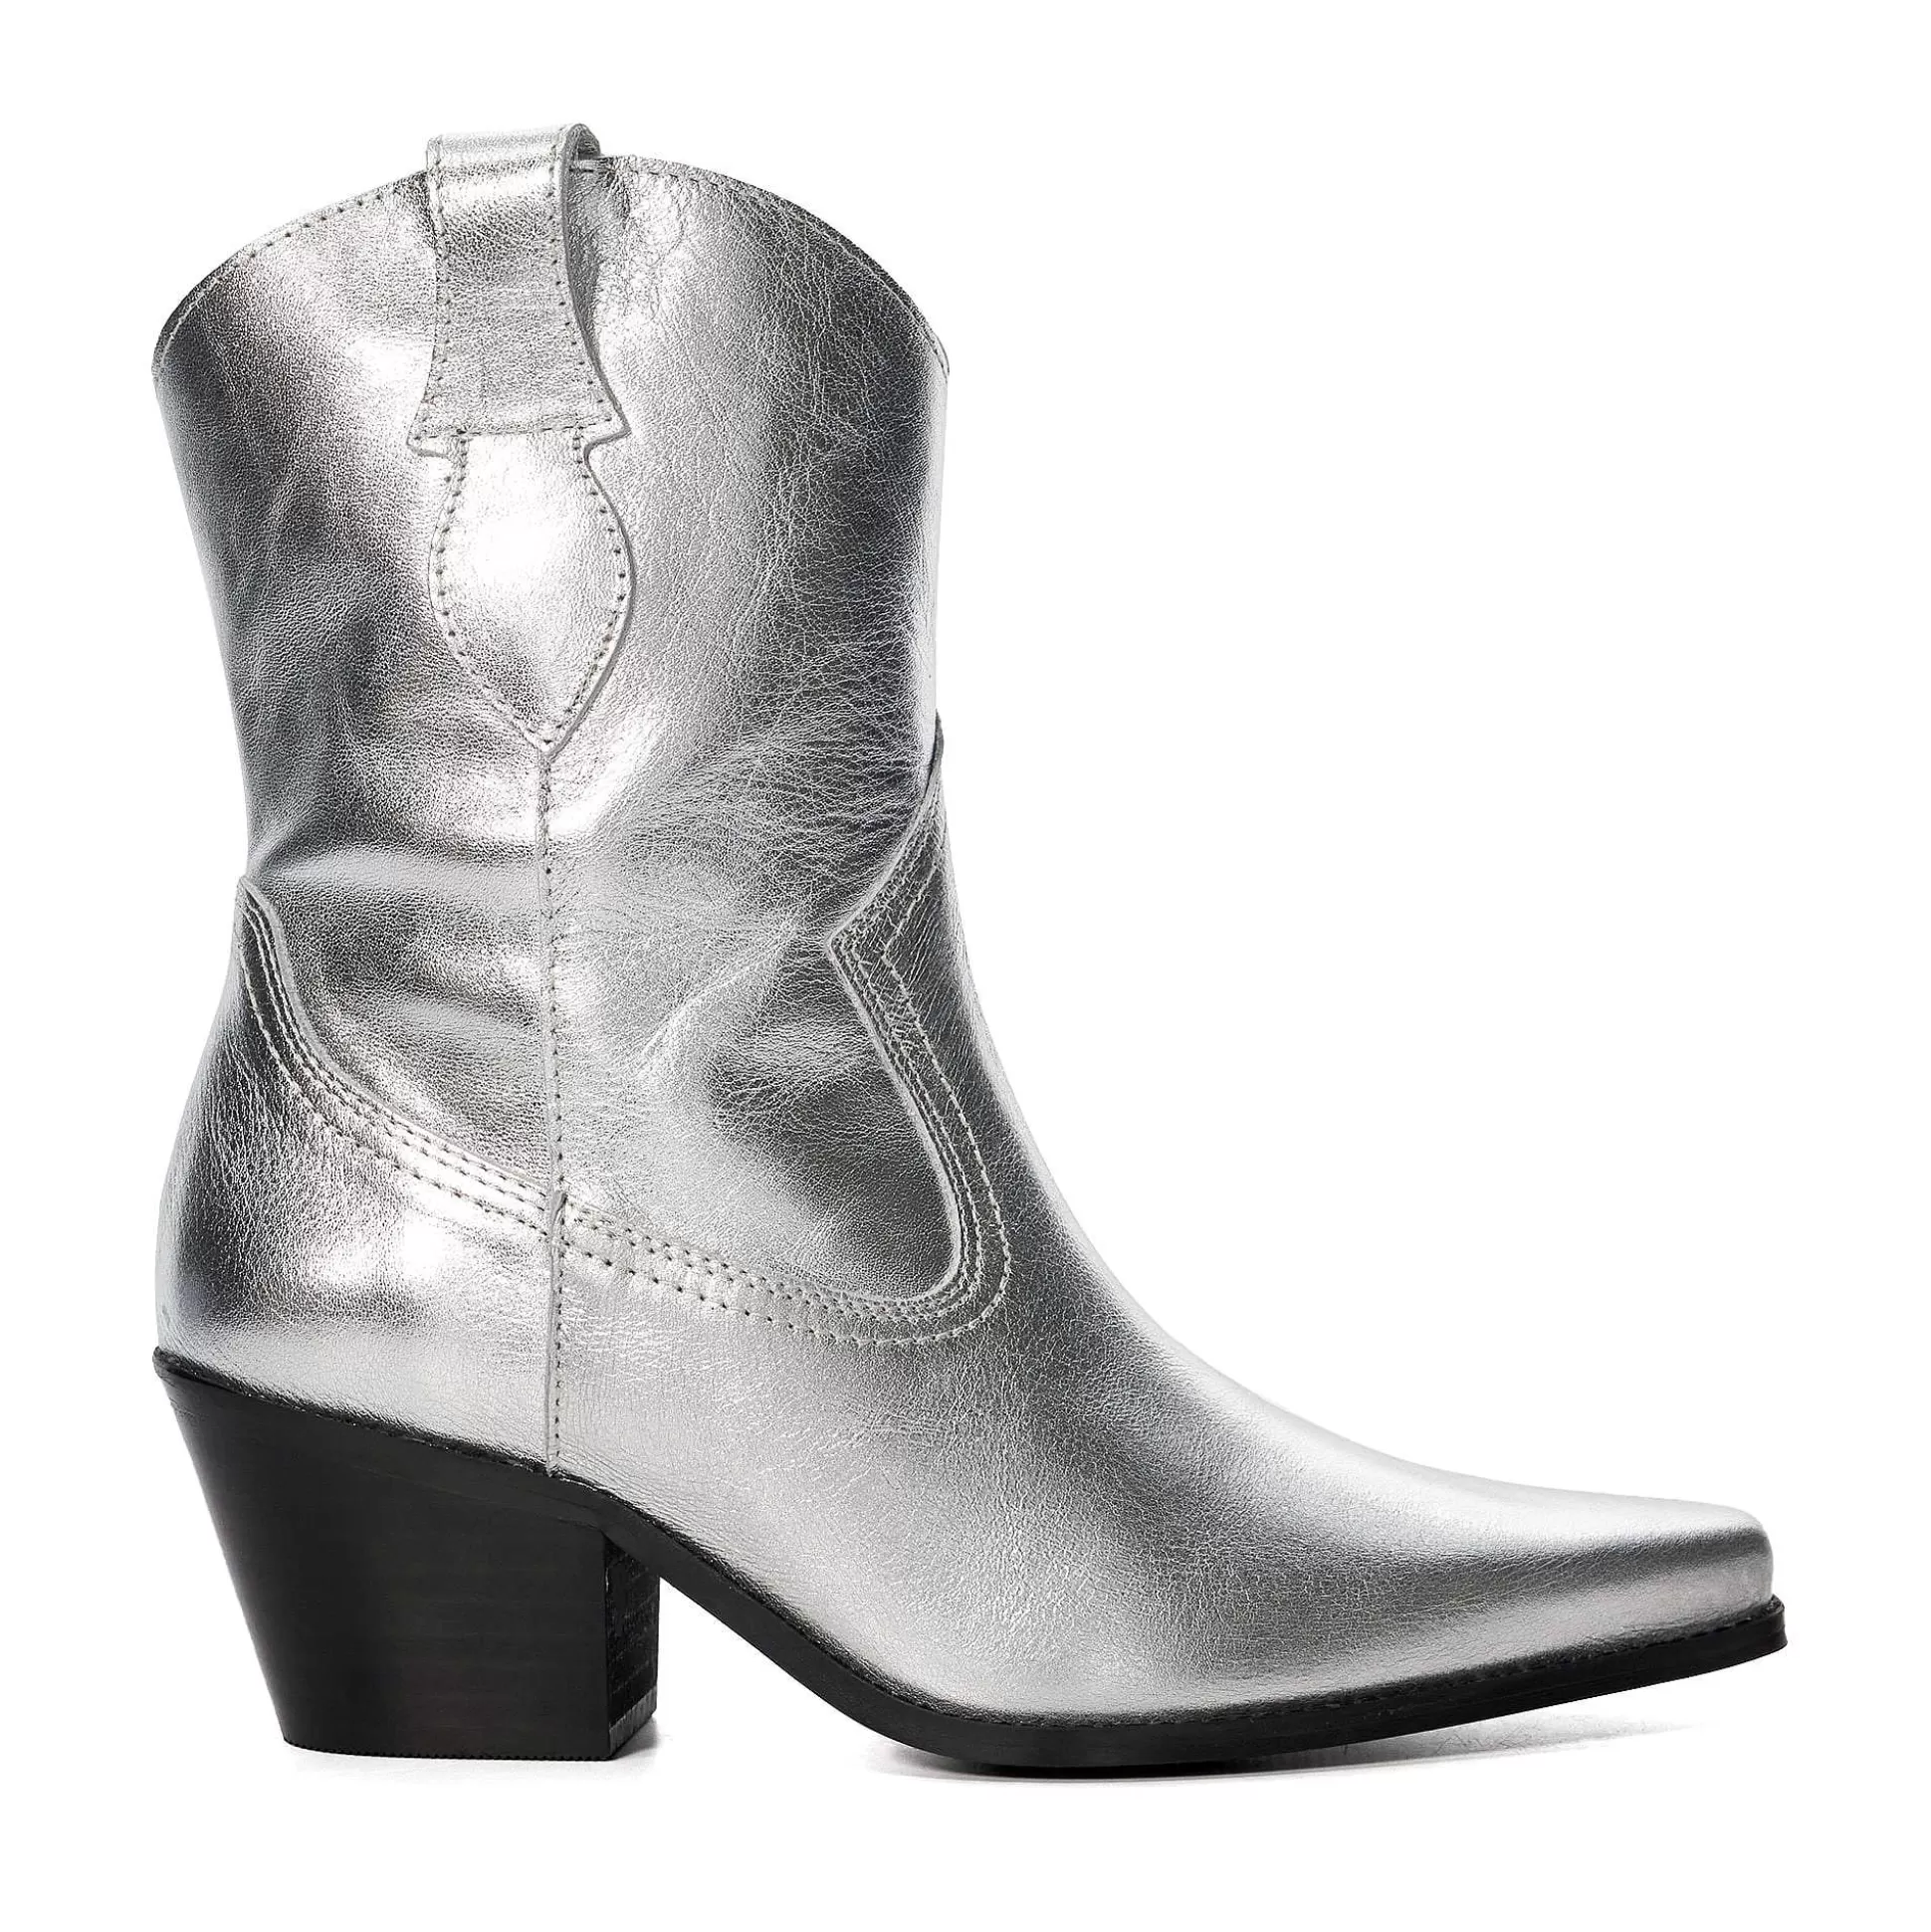 Dune London PARDNER 2 - SILVER-Women Western Cowboy Boots | Ankle Boots